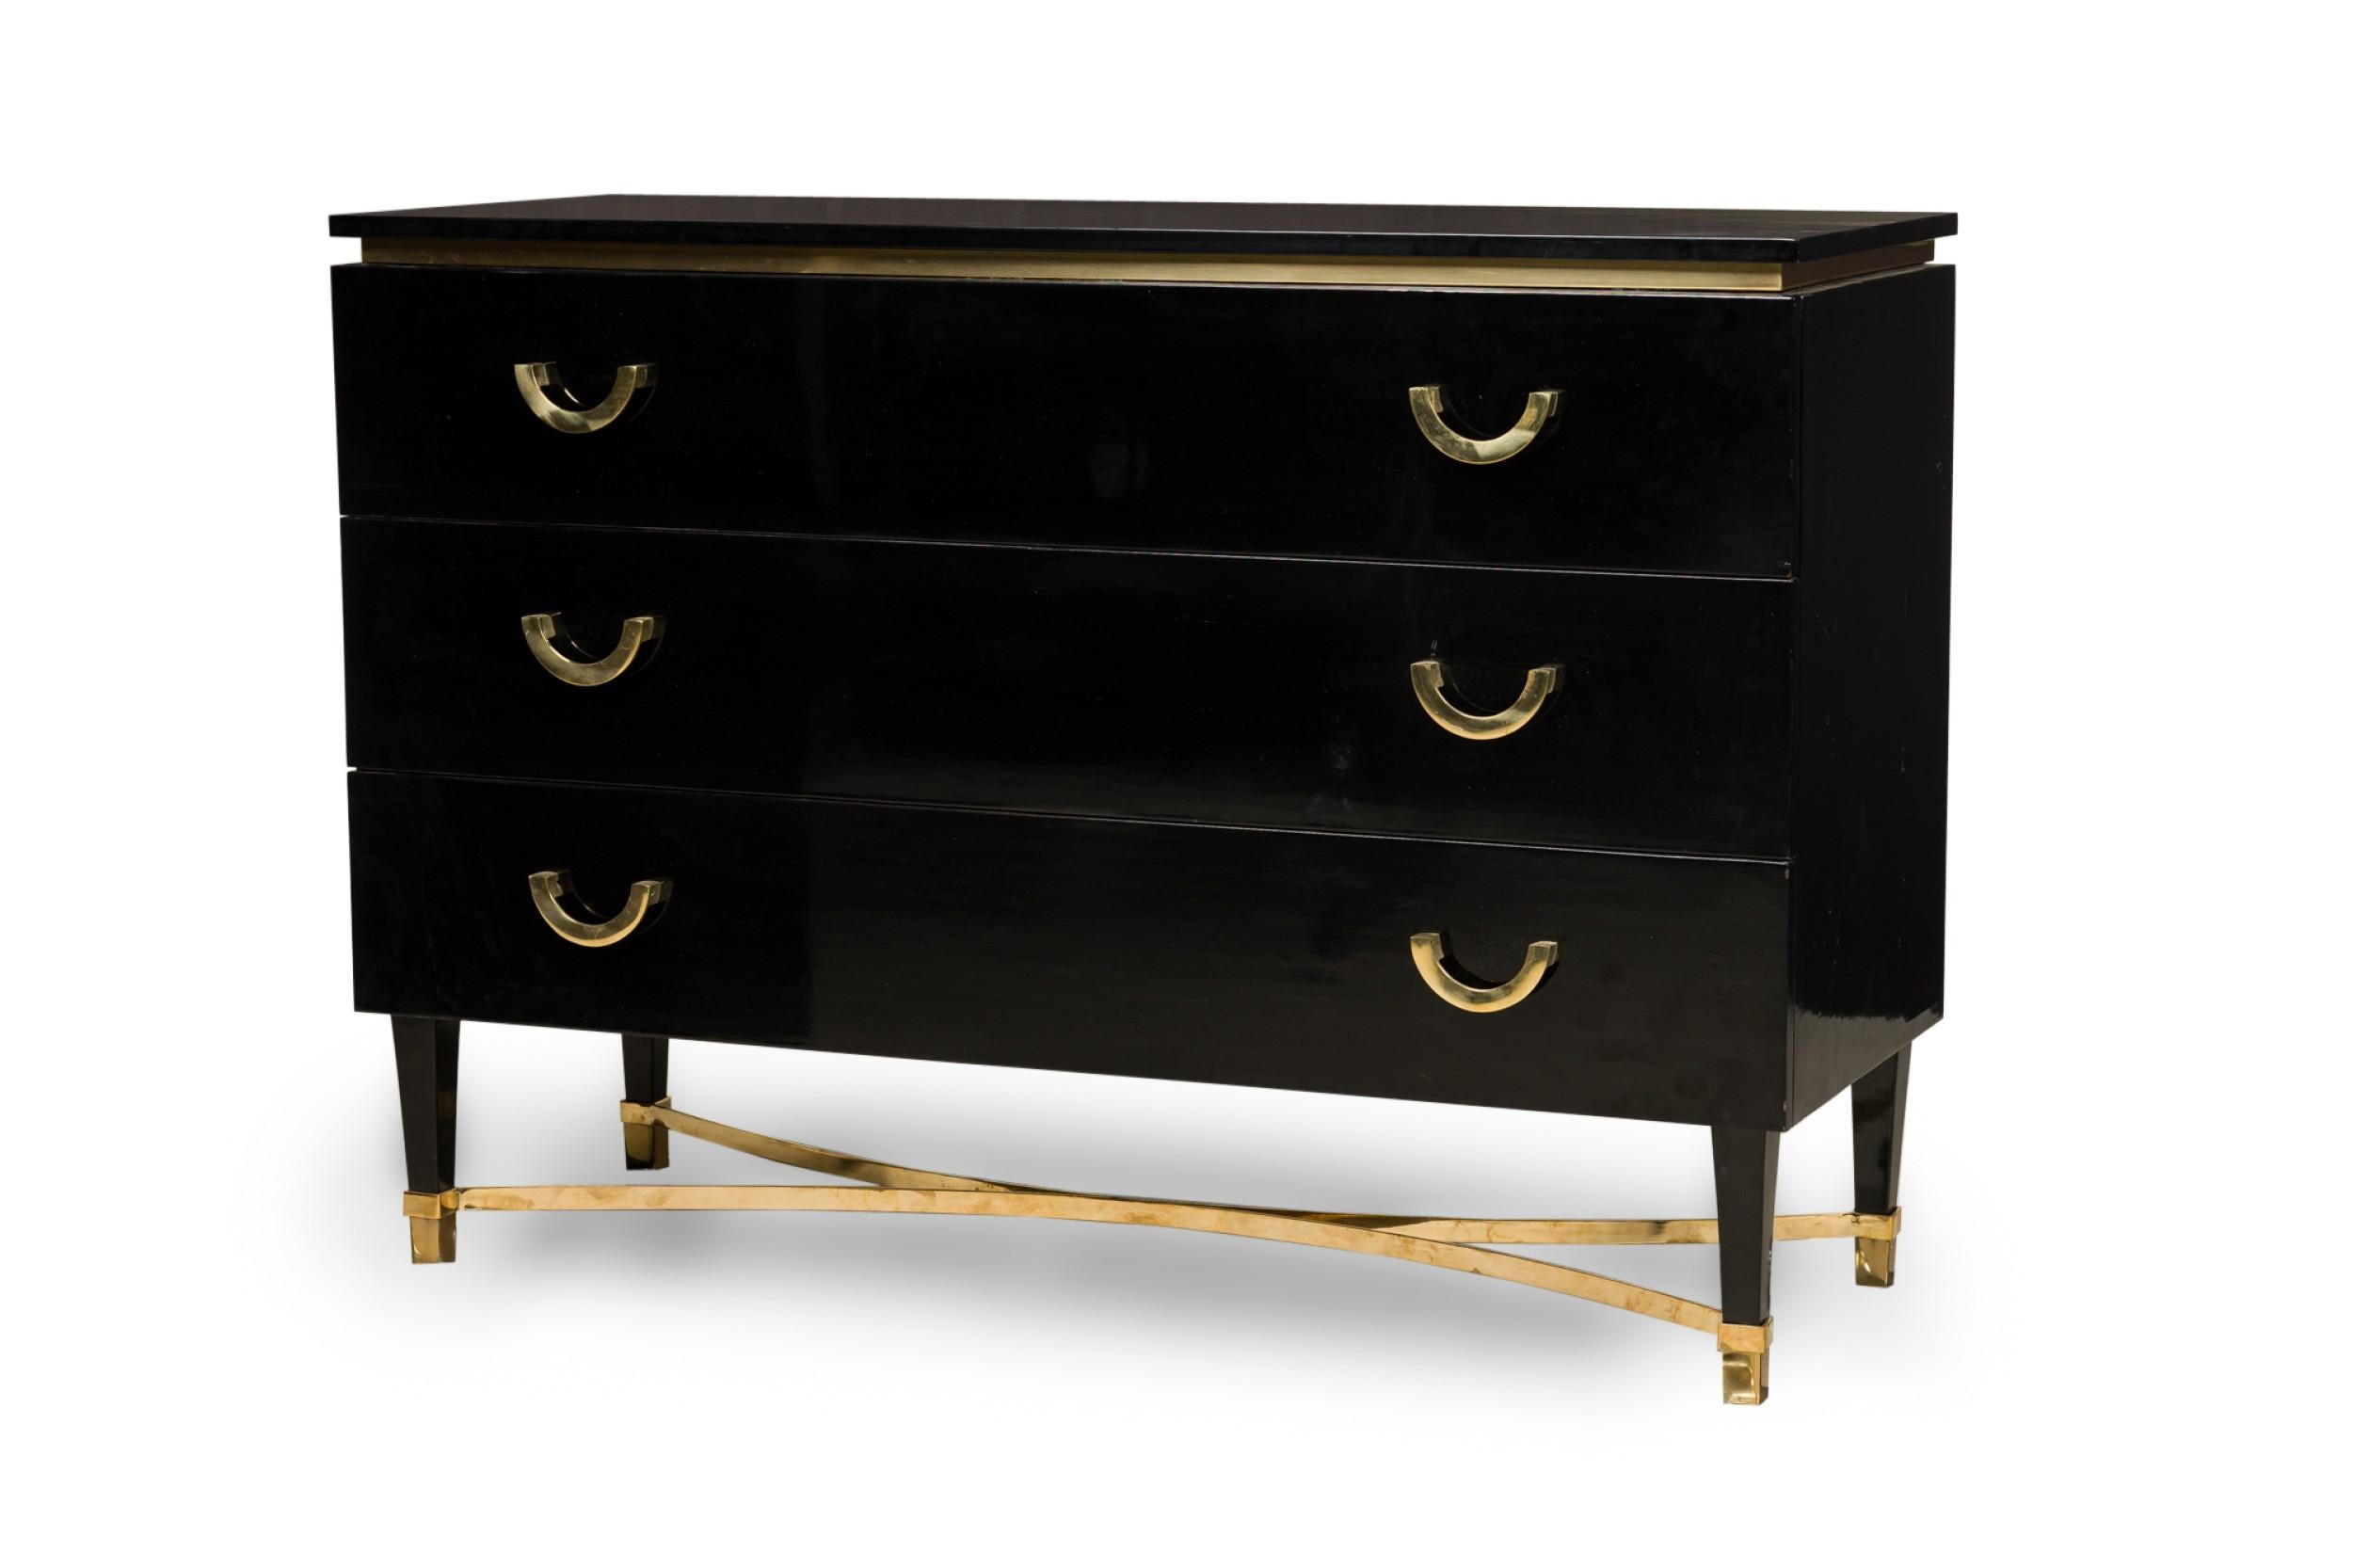 Hollywood Regency Pair of Midcentury Ebonized Wood & Bronze Mounted Dressers 'Manner of Gucci' For Sale